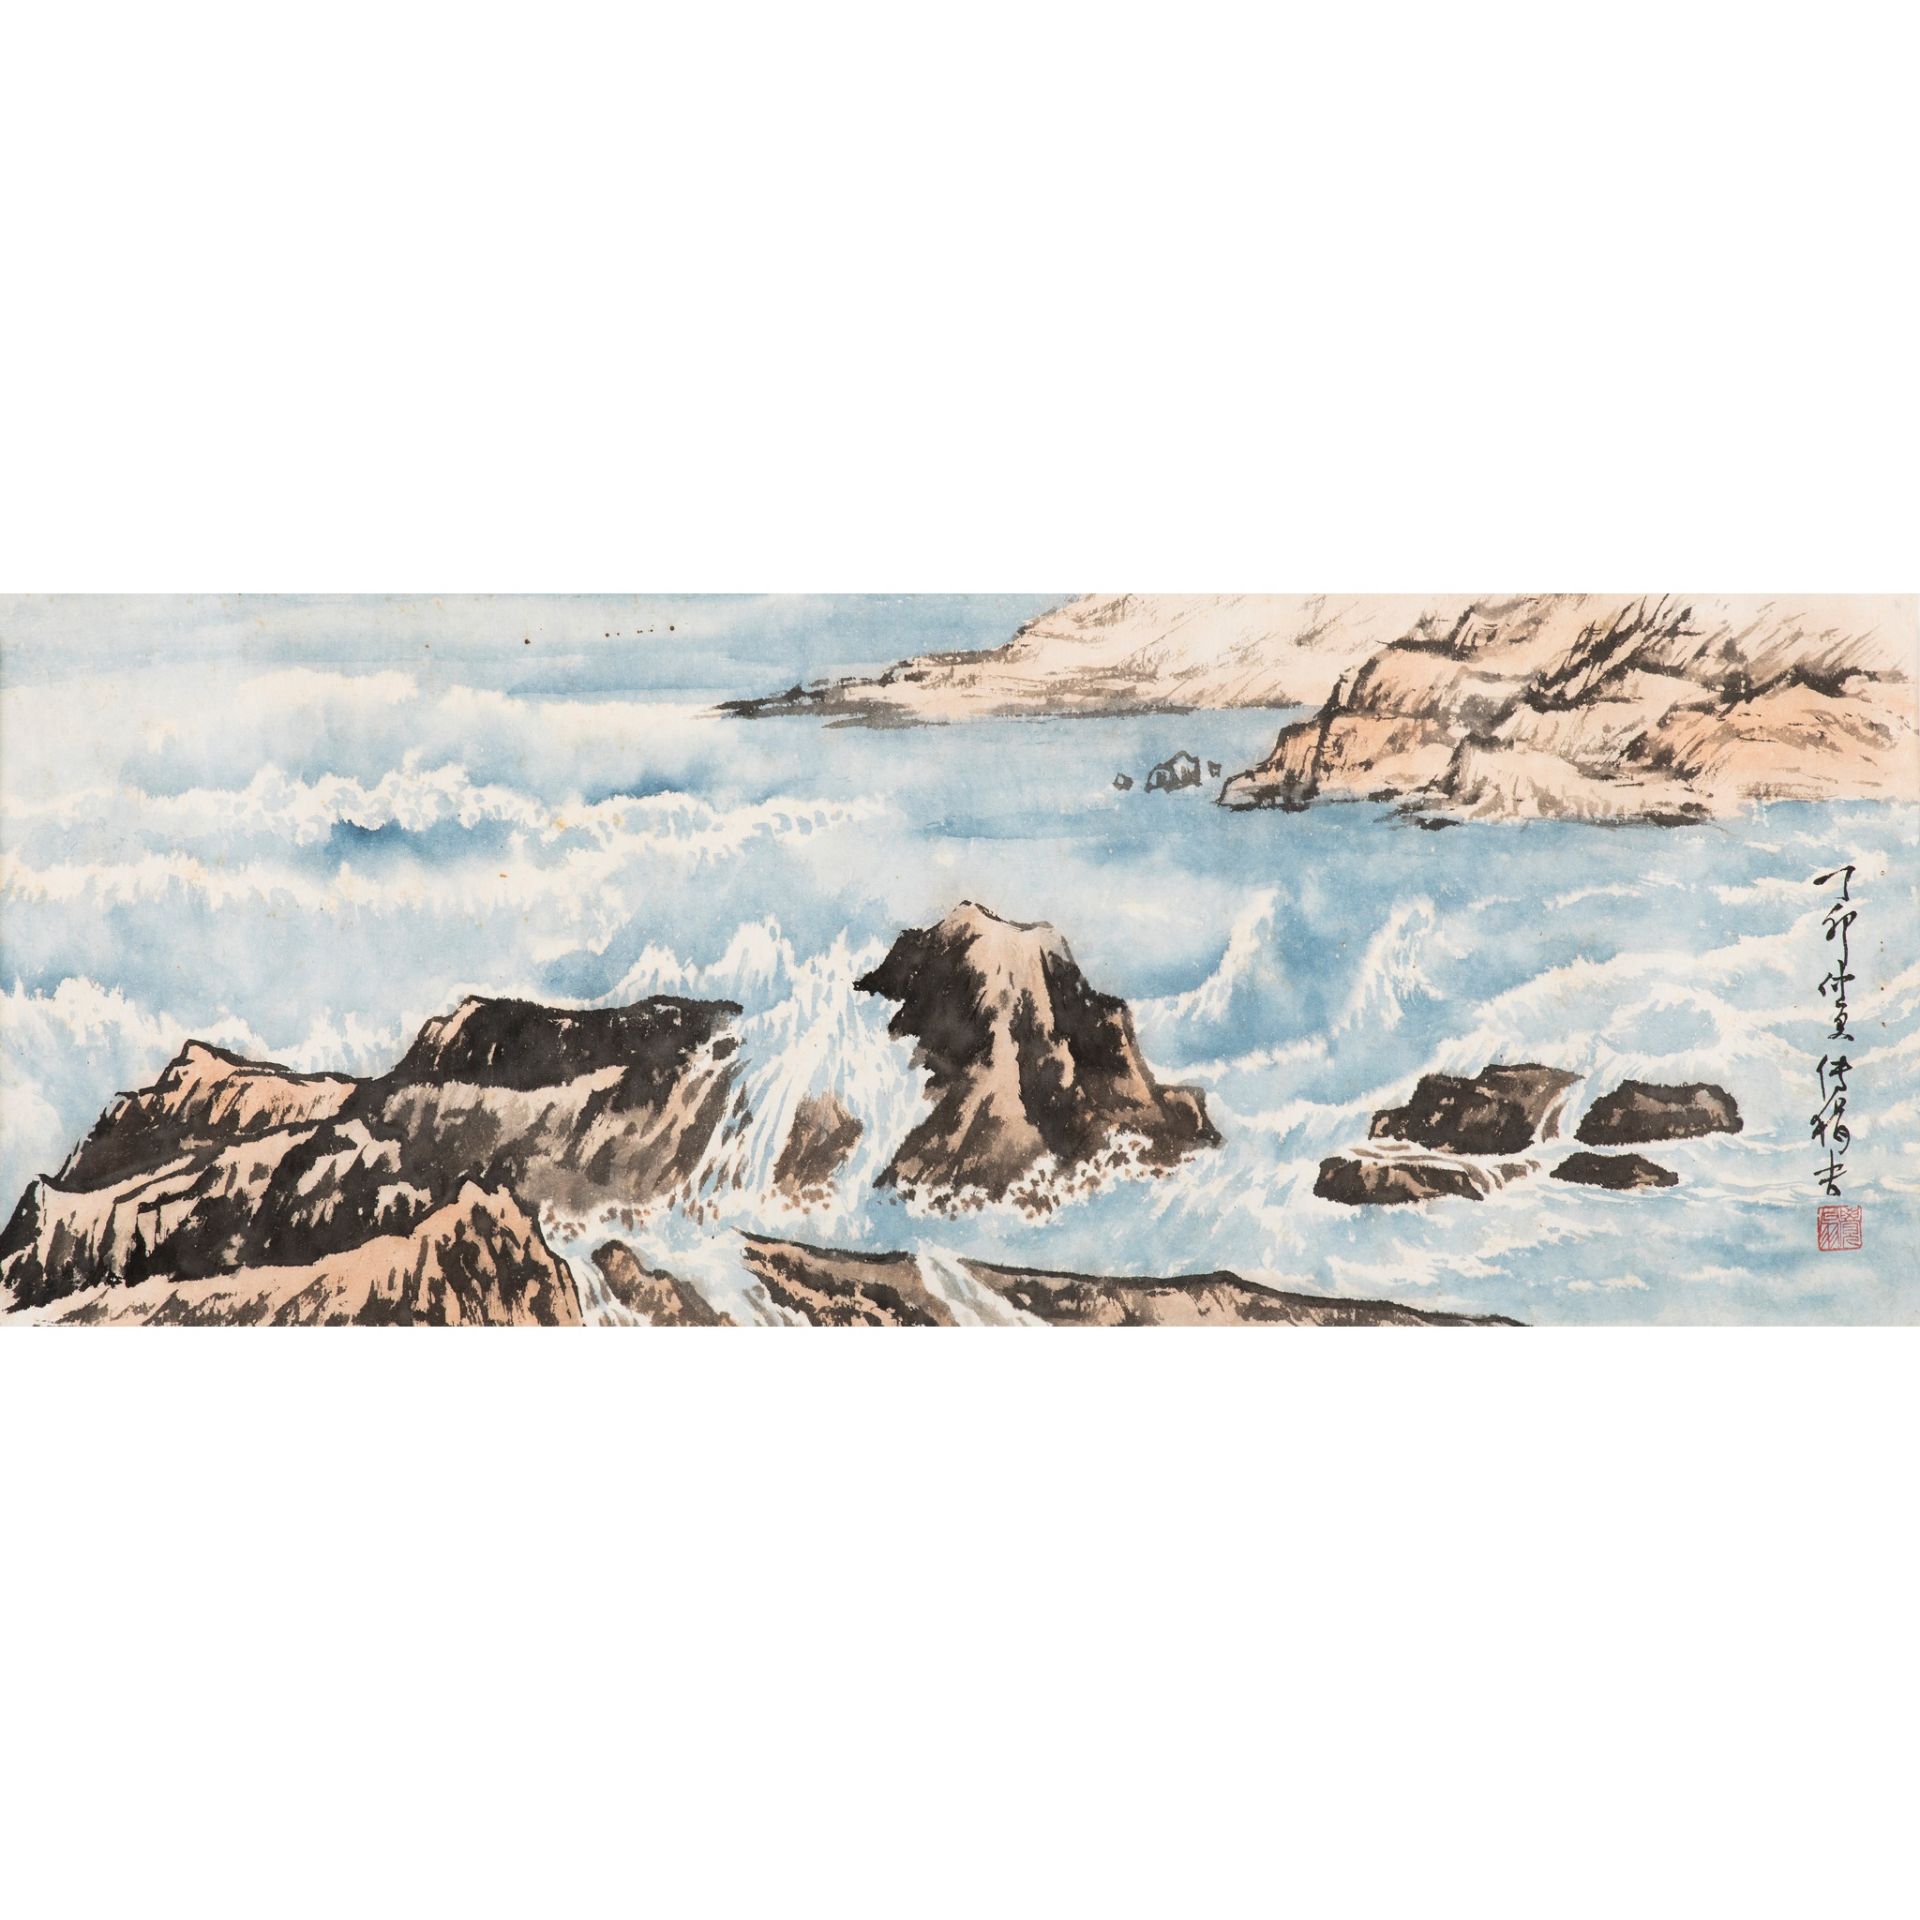 FU JUANFU (1910-2007) TWO INK PAINTINGS OF LANDSCAPES, 20TH CENTURY